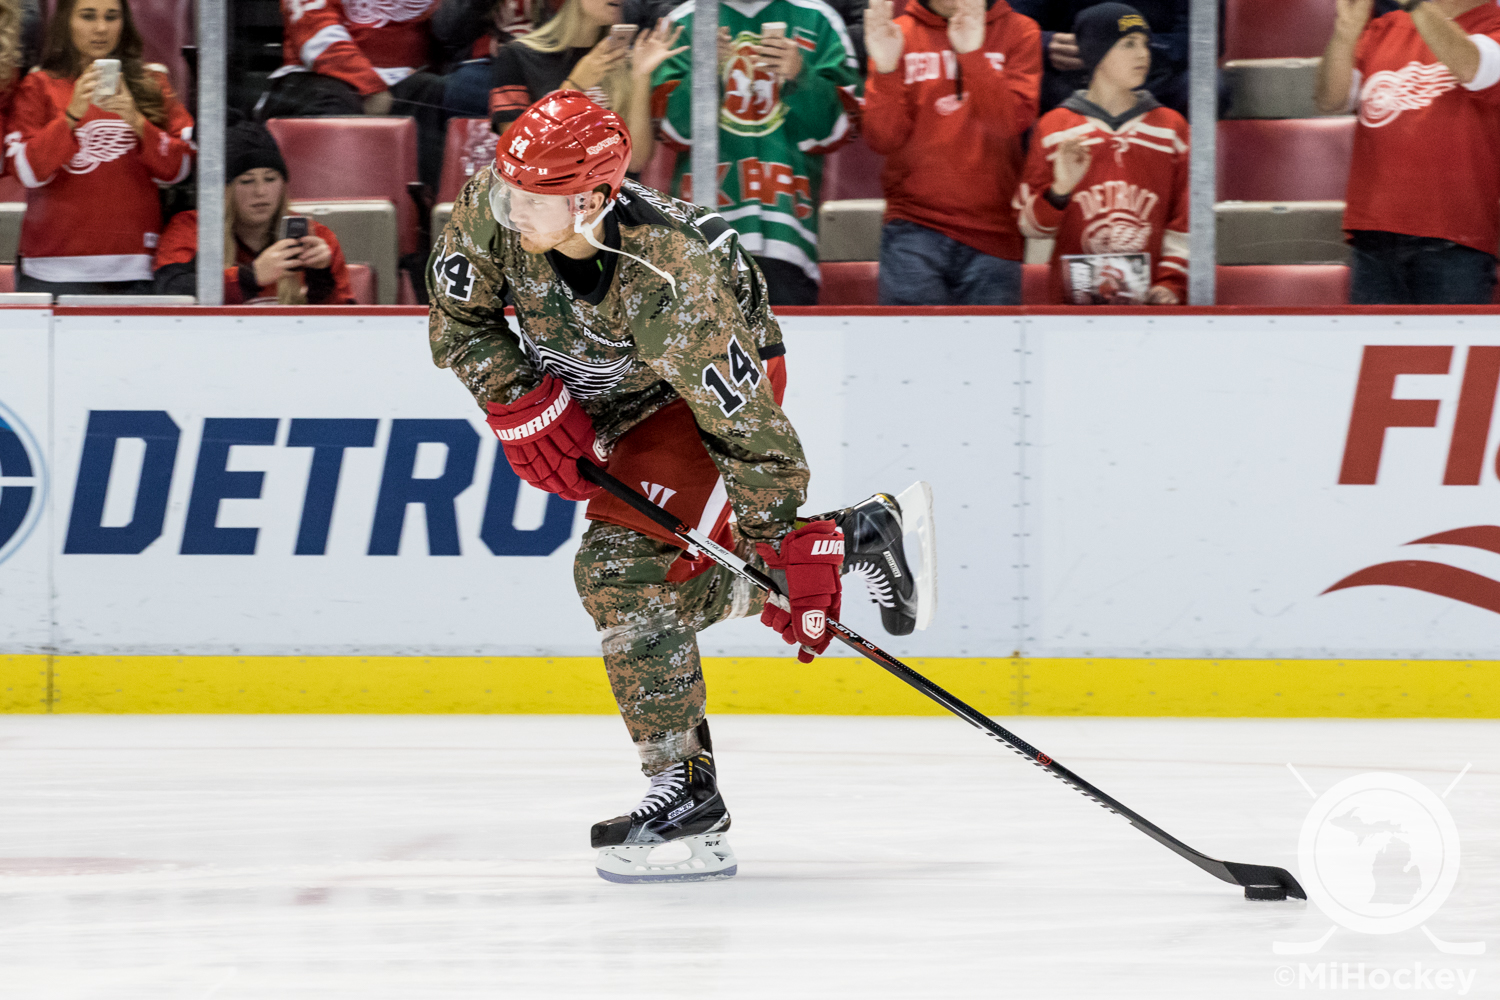 Detroit Red Wings Camo Practice Jersey